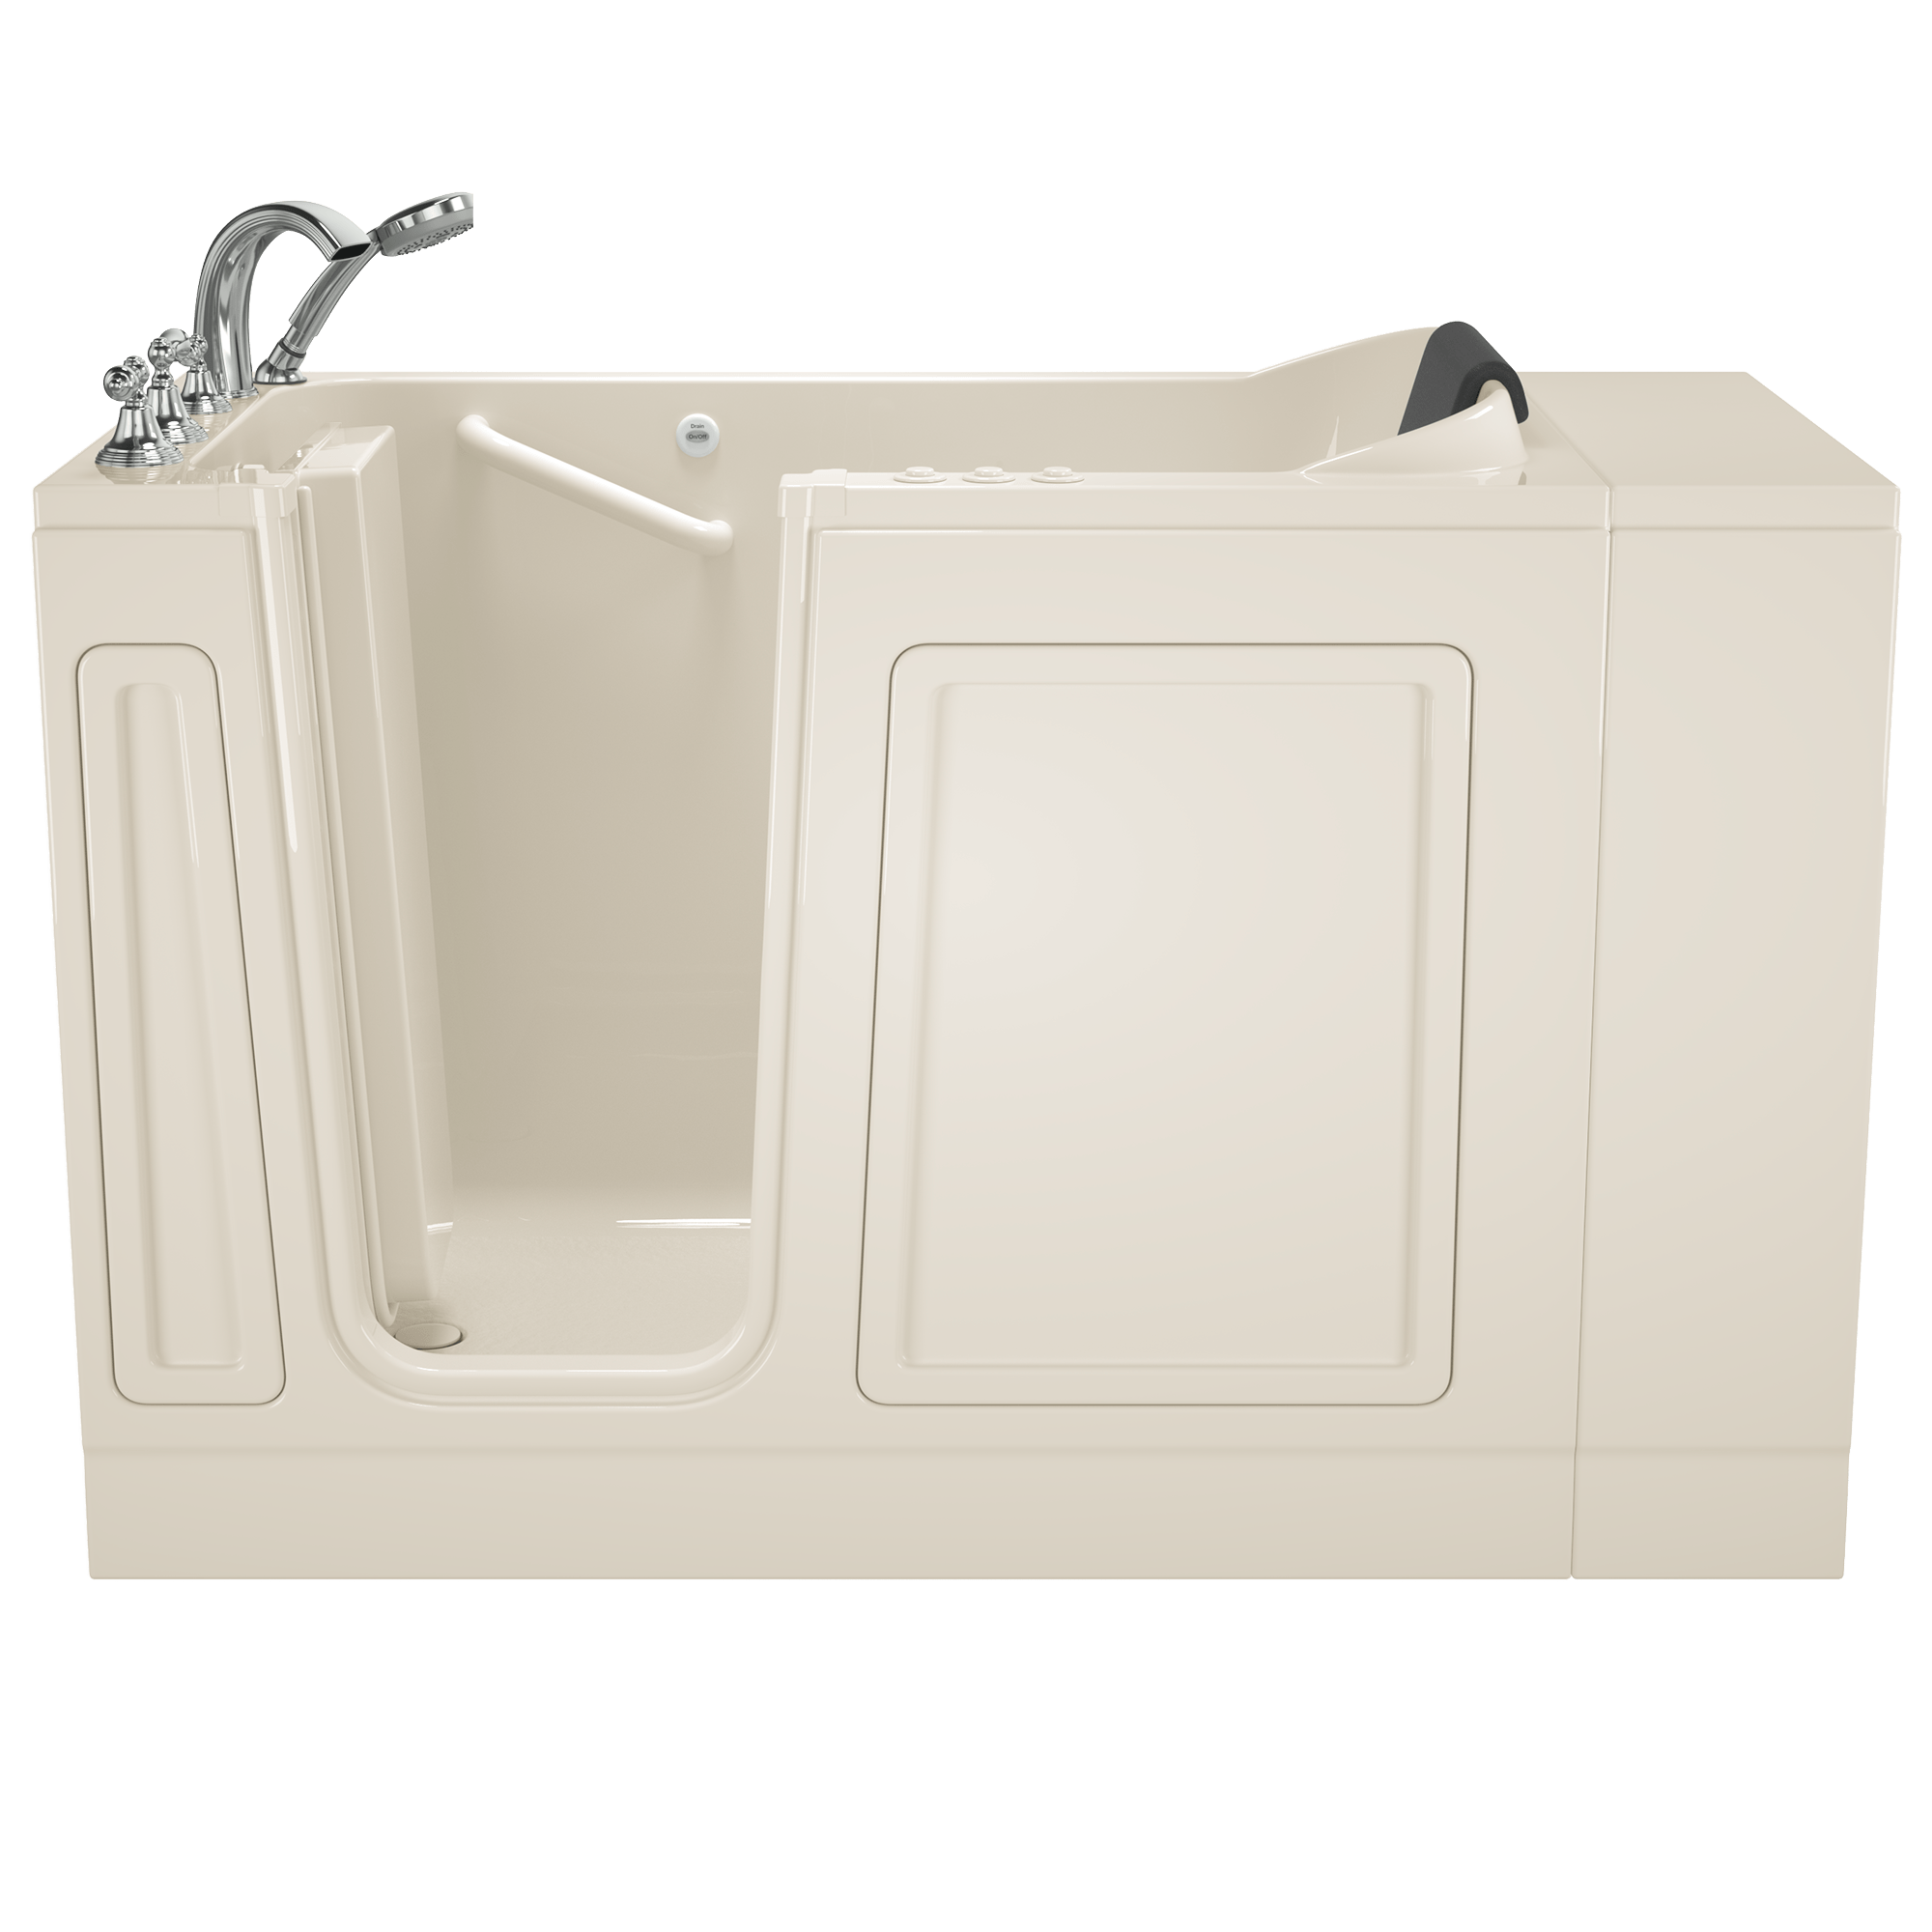 Acrylic Luxury Series 28 x 48 Inch Walk in Tub With Combination Air Spa and Whirlpool Systems   Left Hand Drain With Faucet WIB LINEN